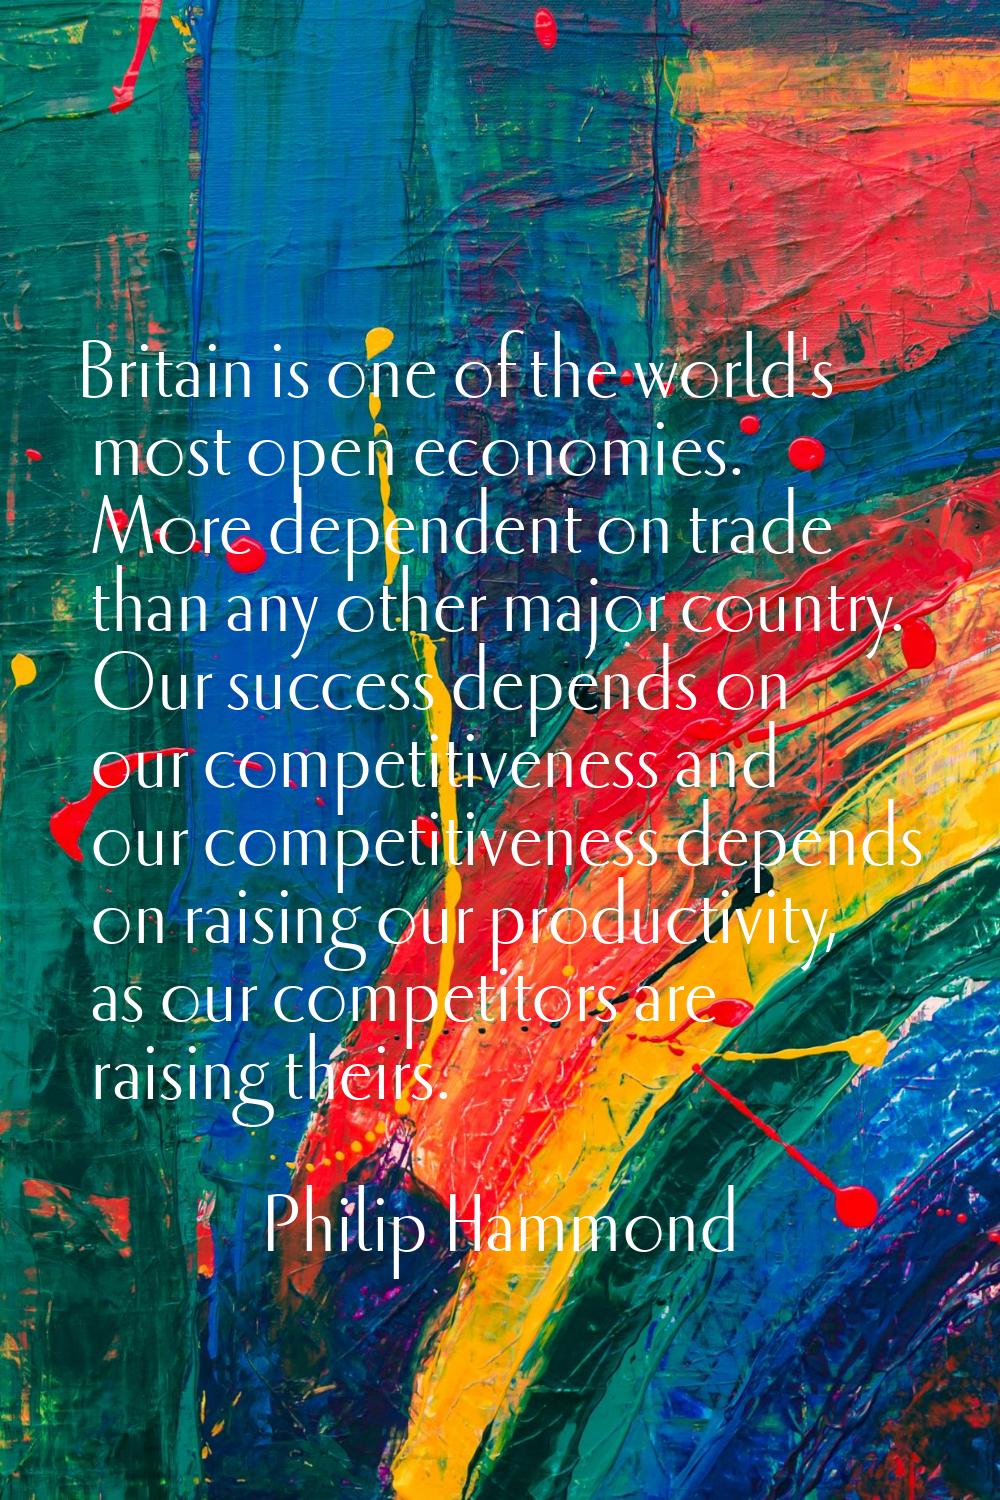 Britain is one of the world's most open economies. More dependent on trade than any other major cou